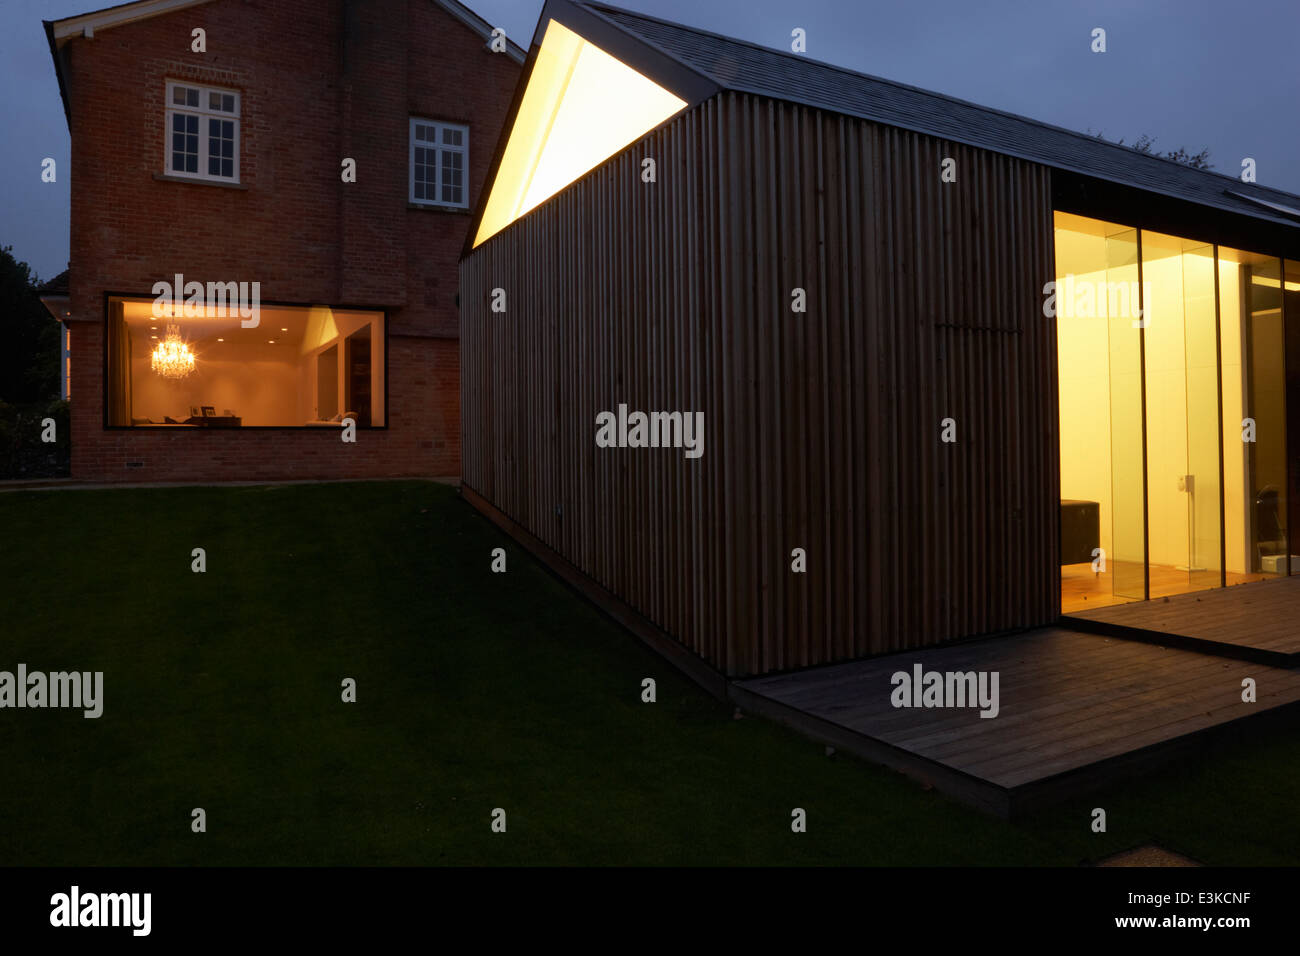 Exterior Of Modern House With Extension At Night Stock Photo